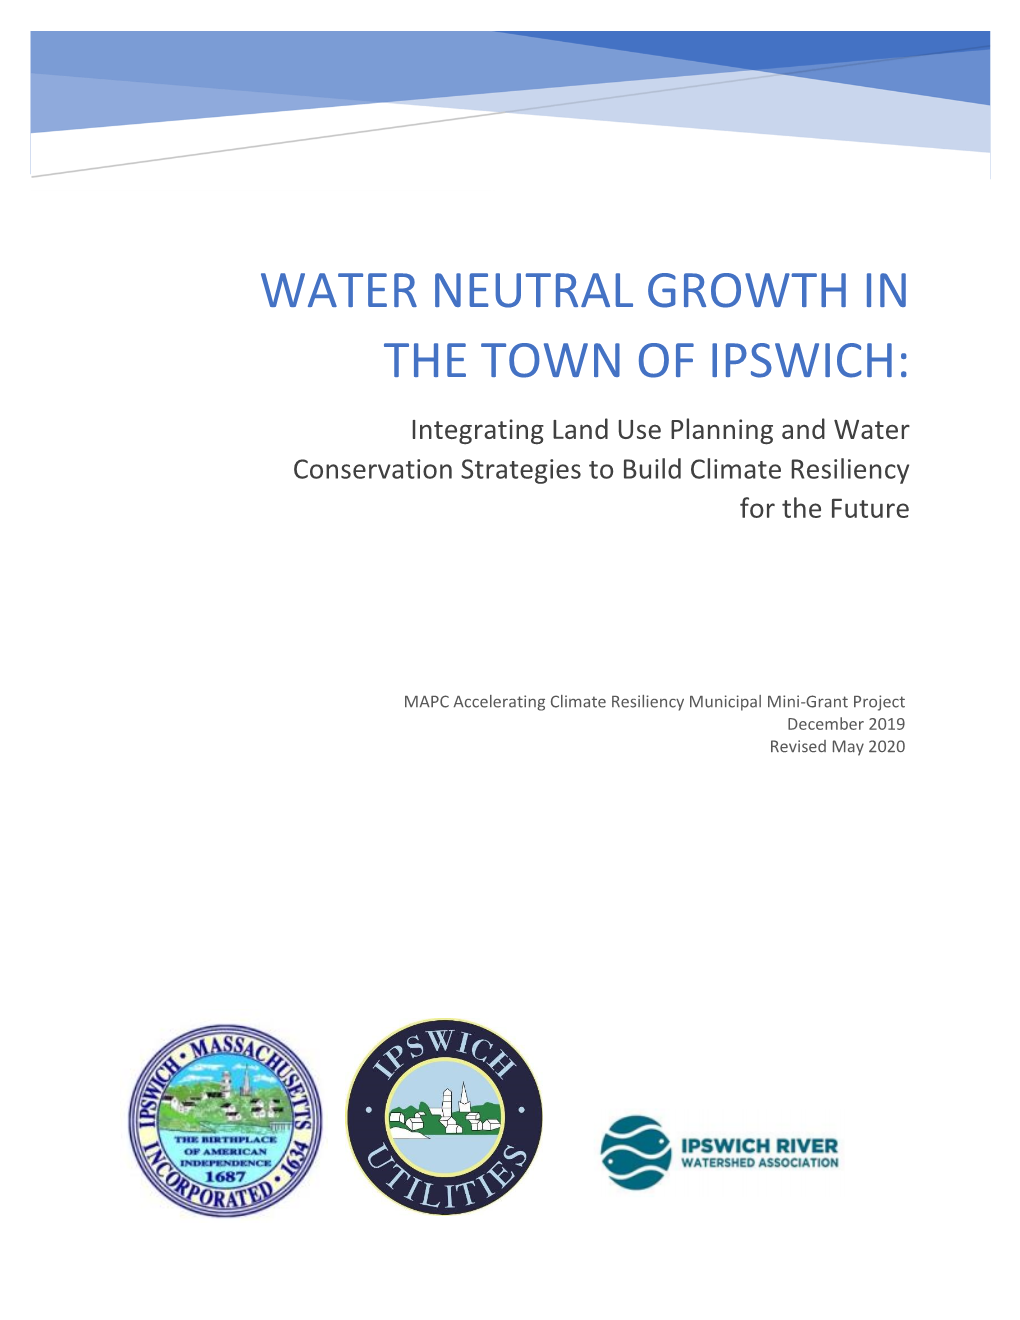 WATER NEUTRAL GROWTH in the TOWN of IPSWICH: Integrating Land Use Planning and Water Conservation Strategies to Build Climate Resiliency for the Future